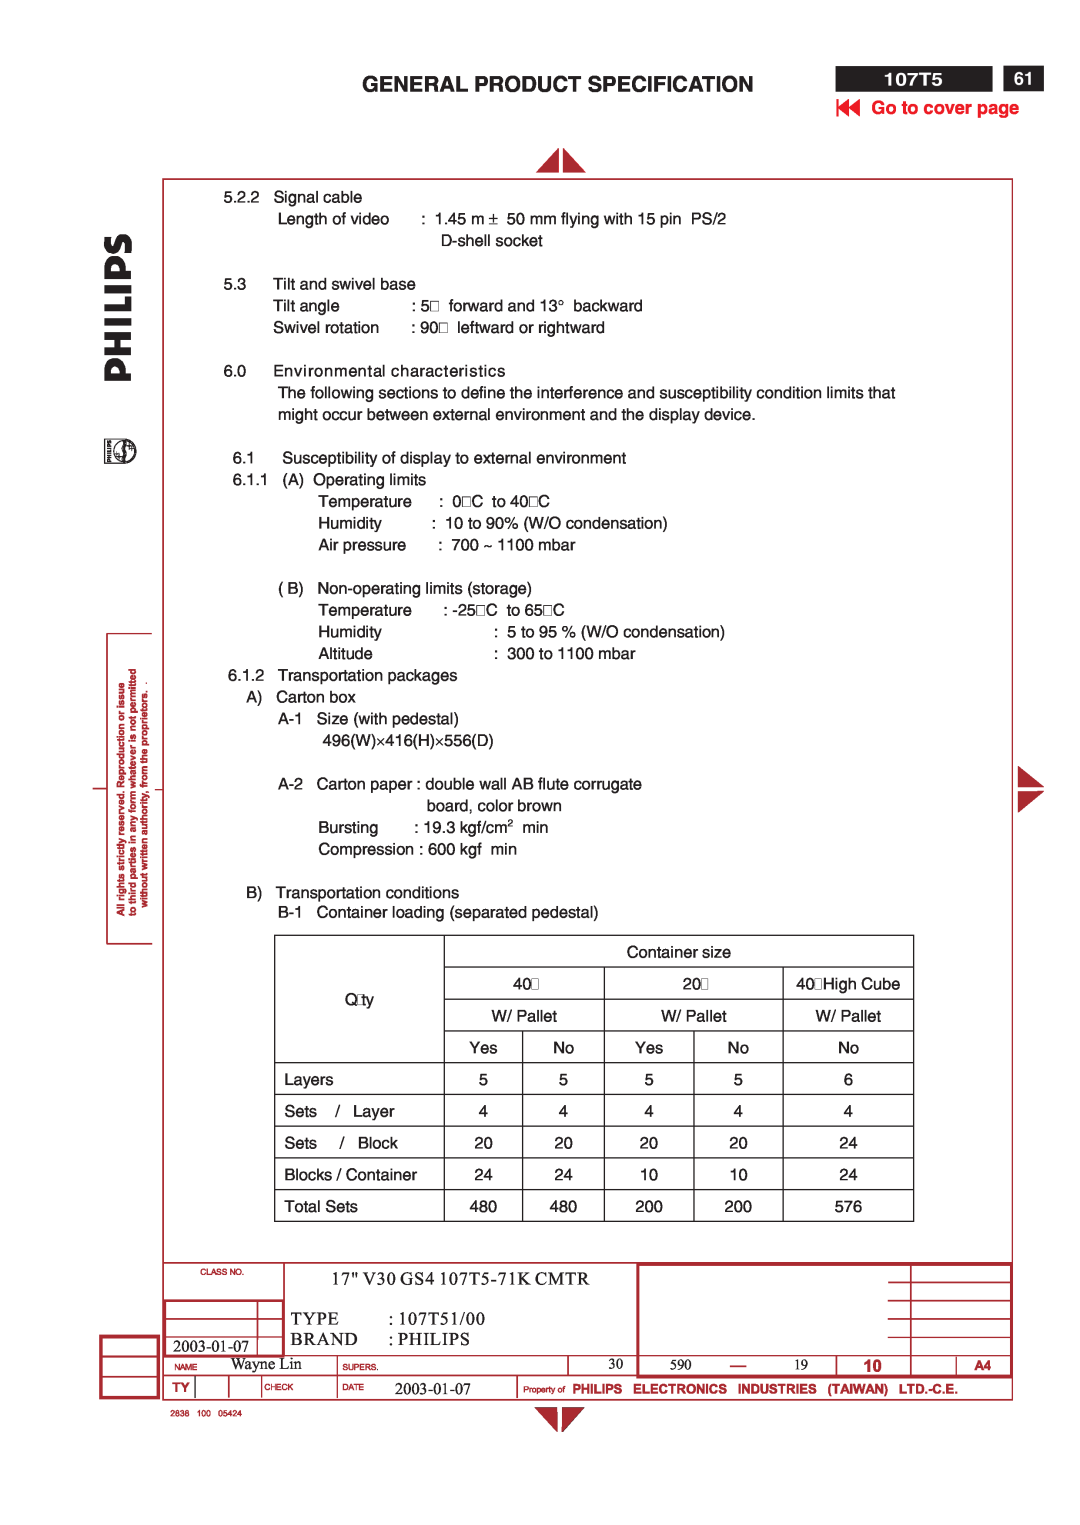 Philips General Product Specification, Go to cover page, 17 V30 GS4 107T5-71K CMTR, Type, 107T51/00, Brand, Philips 